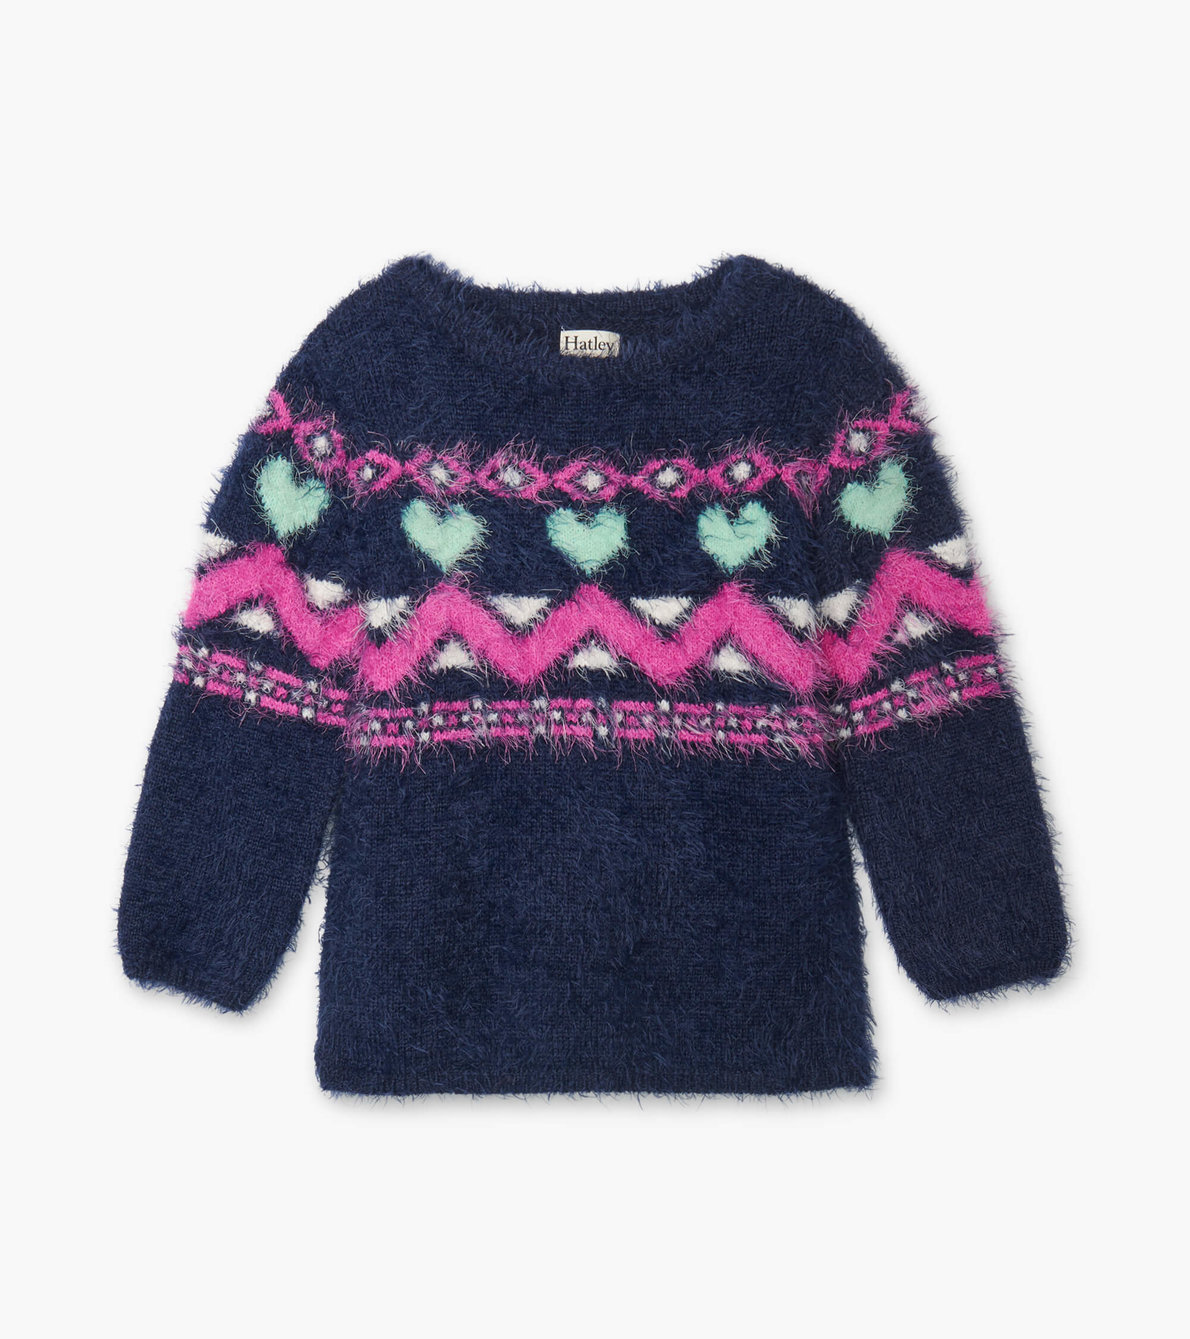 View larger image of Fair Isle Fuzzy Sweater